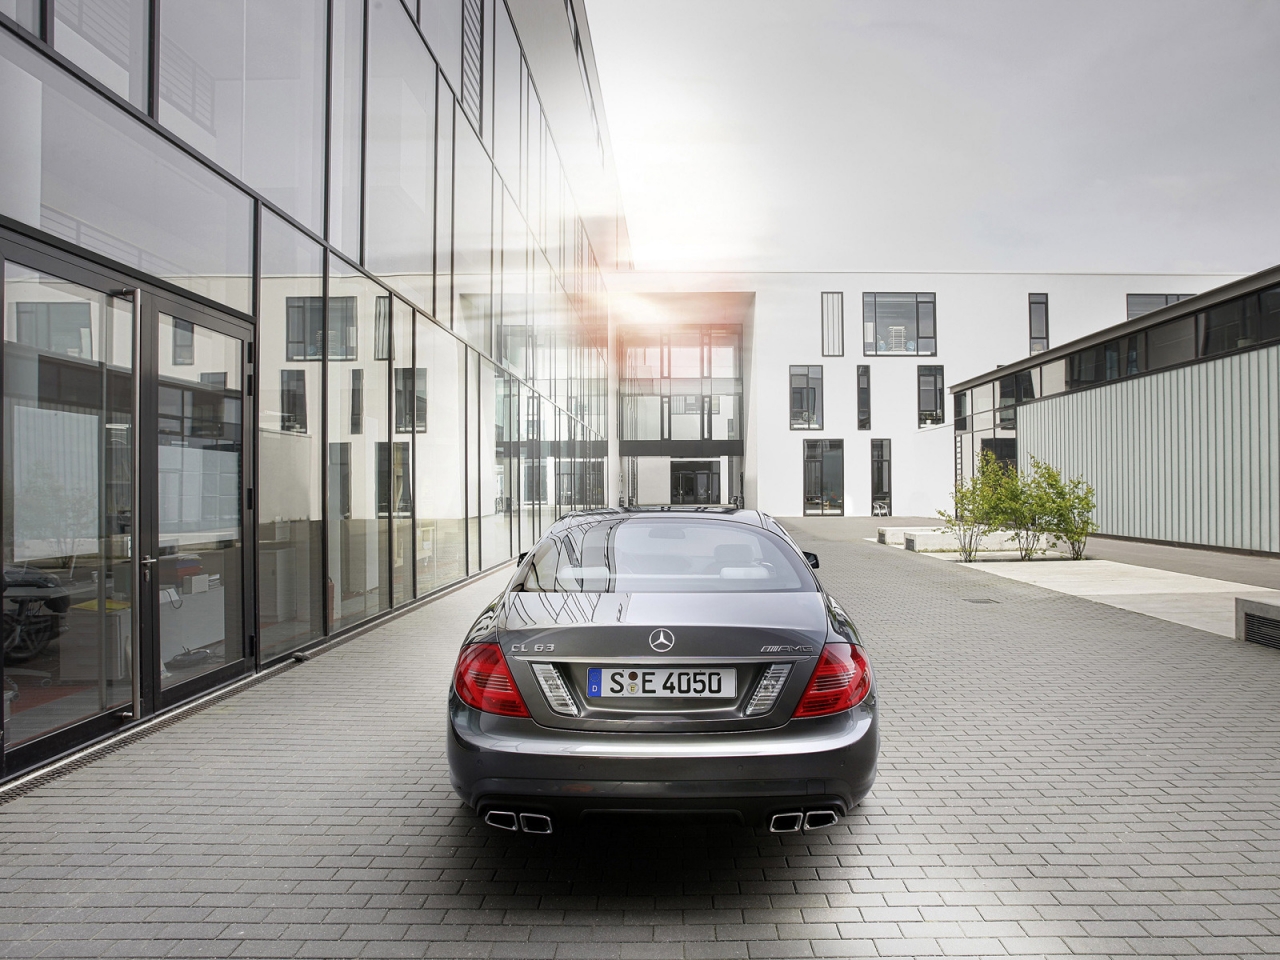 Mercedes CL63 AMG 2011 Rear for 1280 x 960 resolution